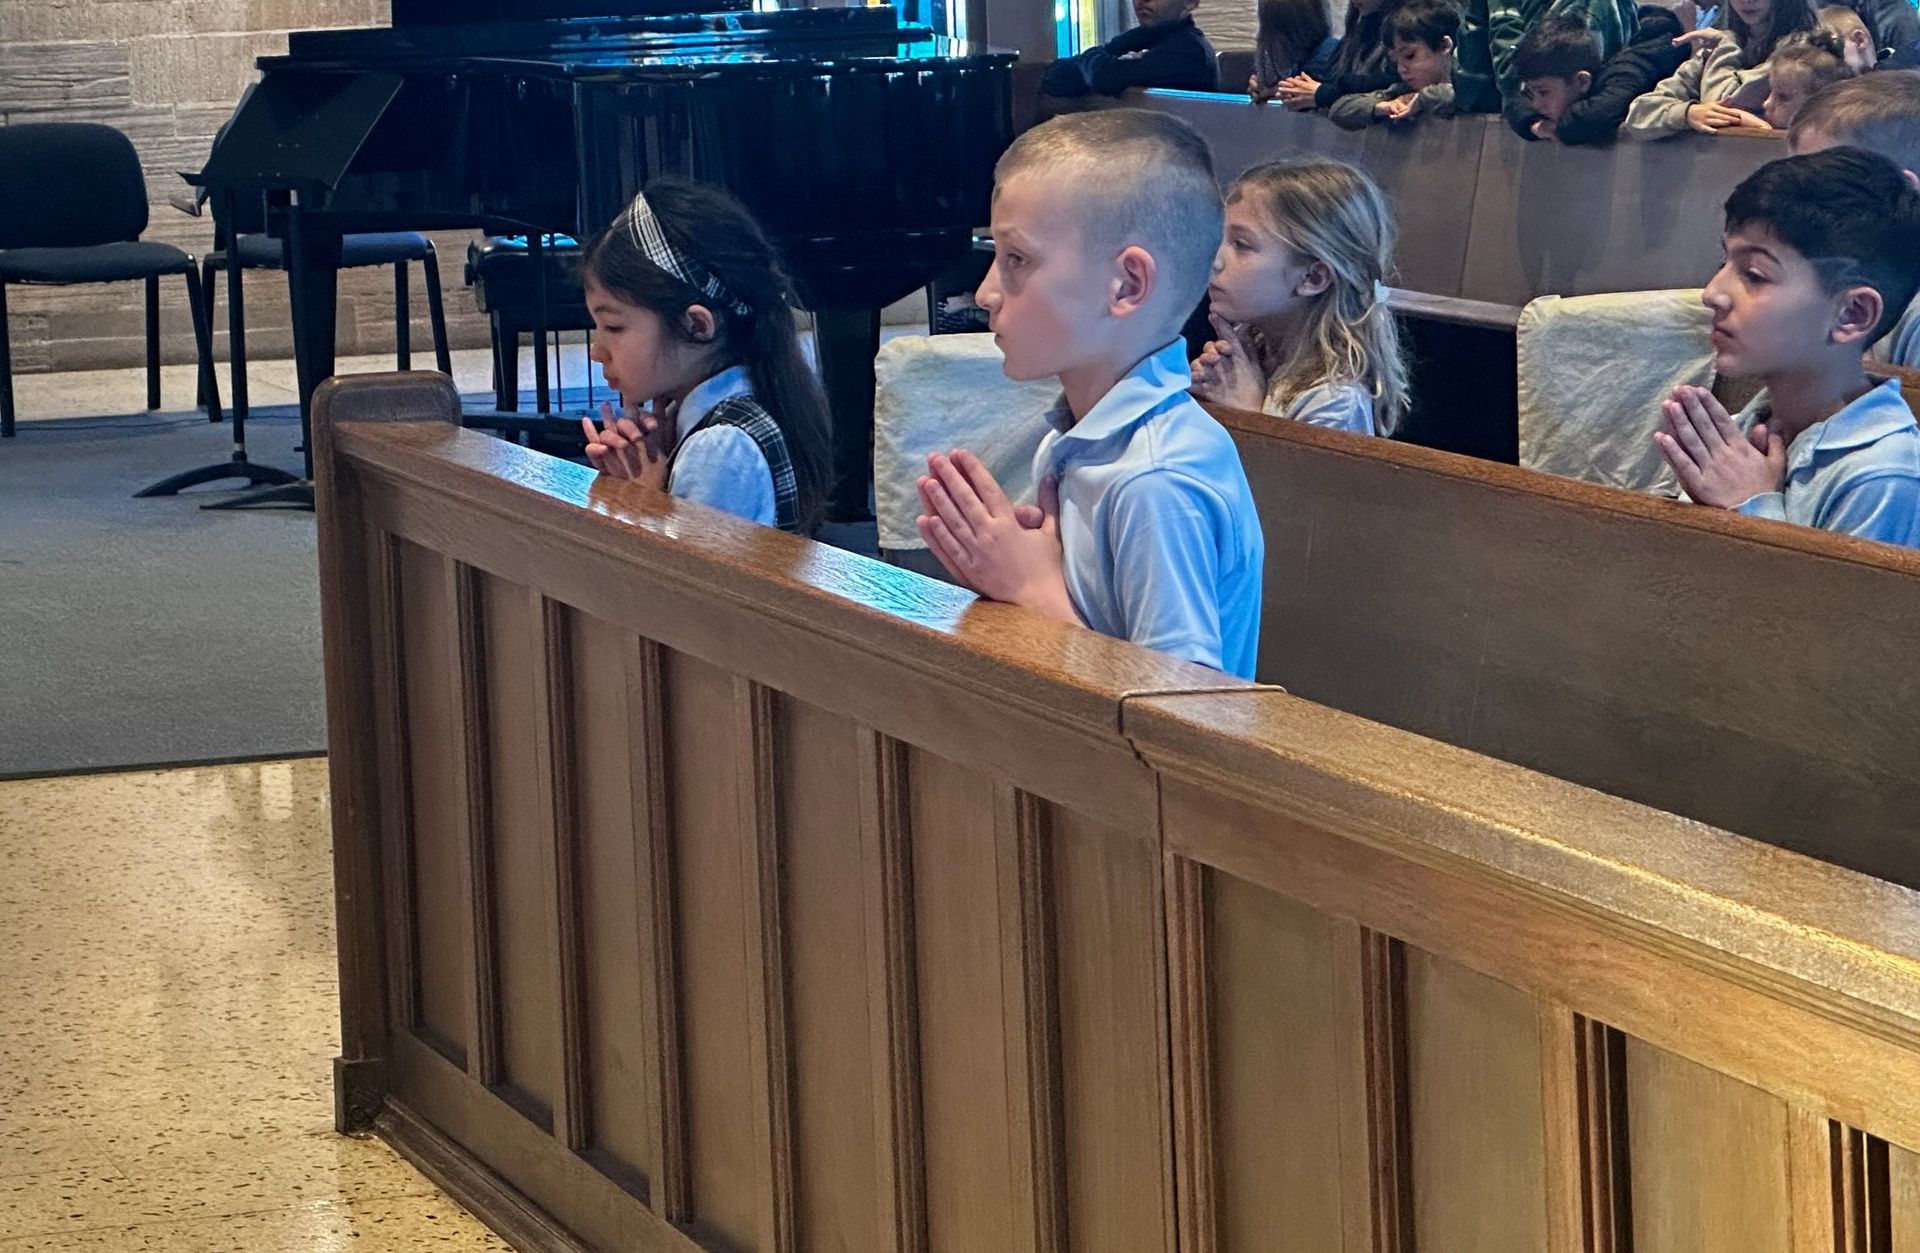 a group of children are praying in a church with a piano in the background .